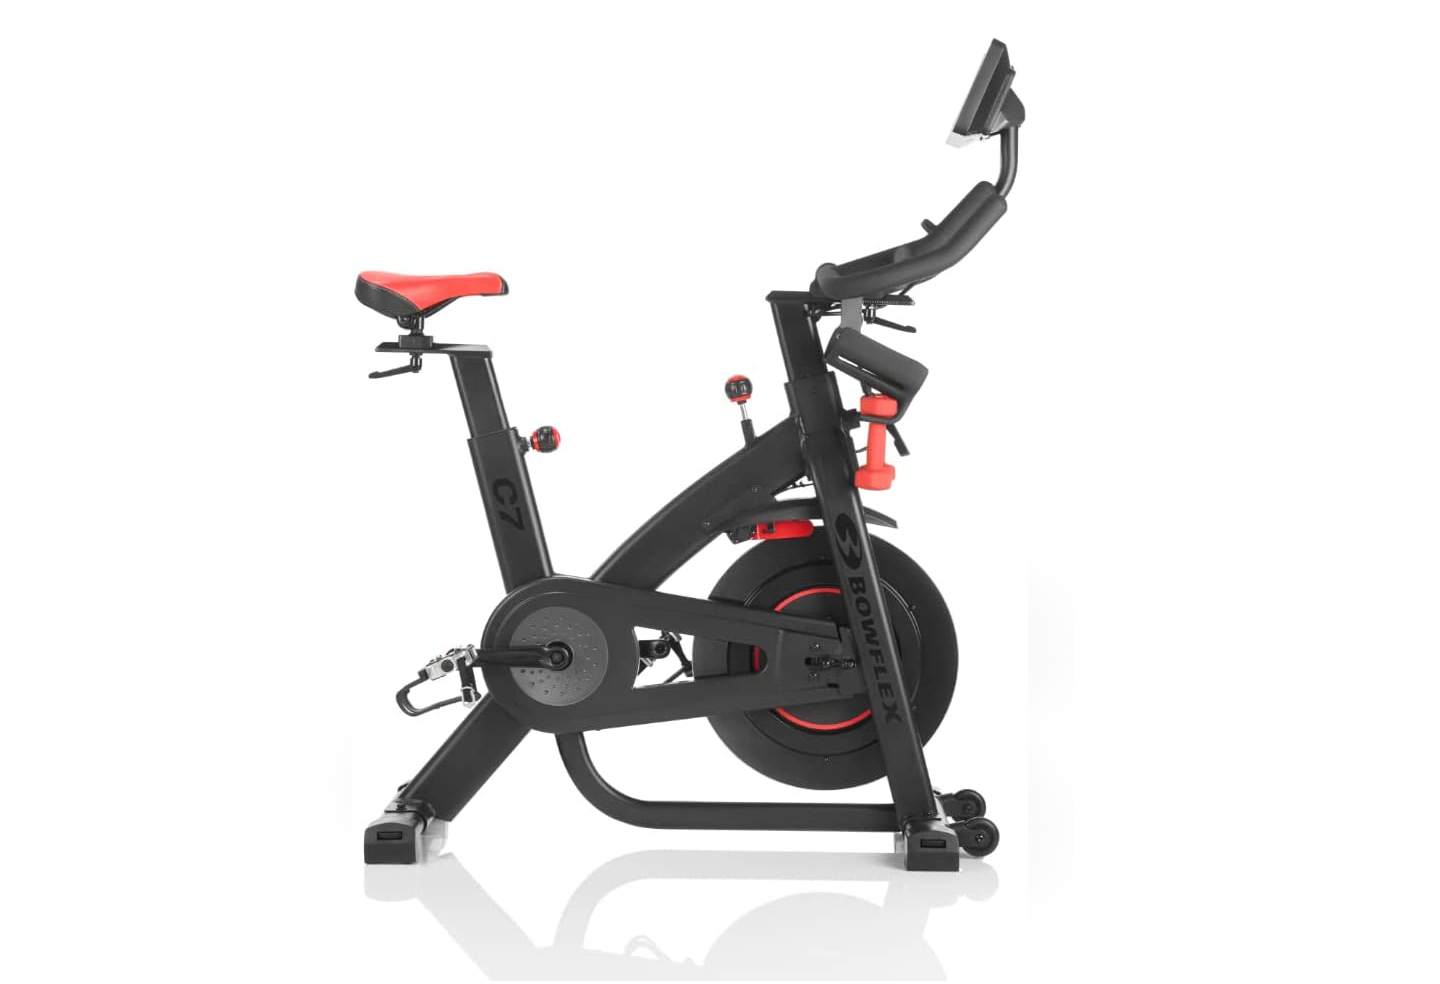 Bowflex: Best Exercise Bike for Outdoor Simulation